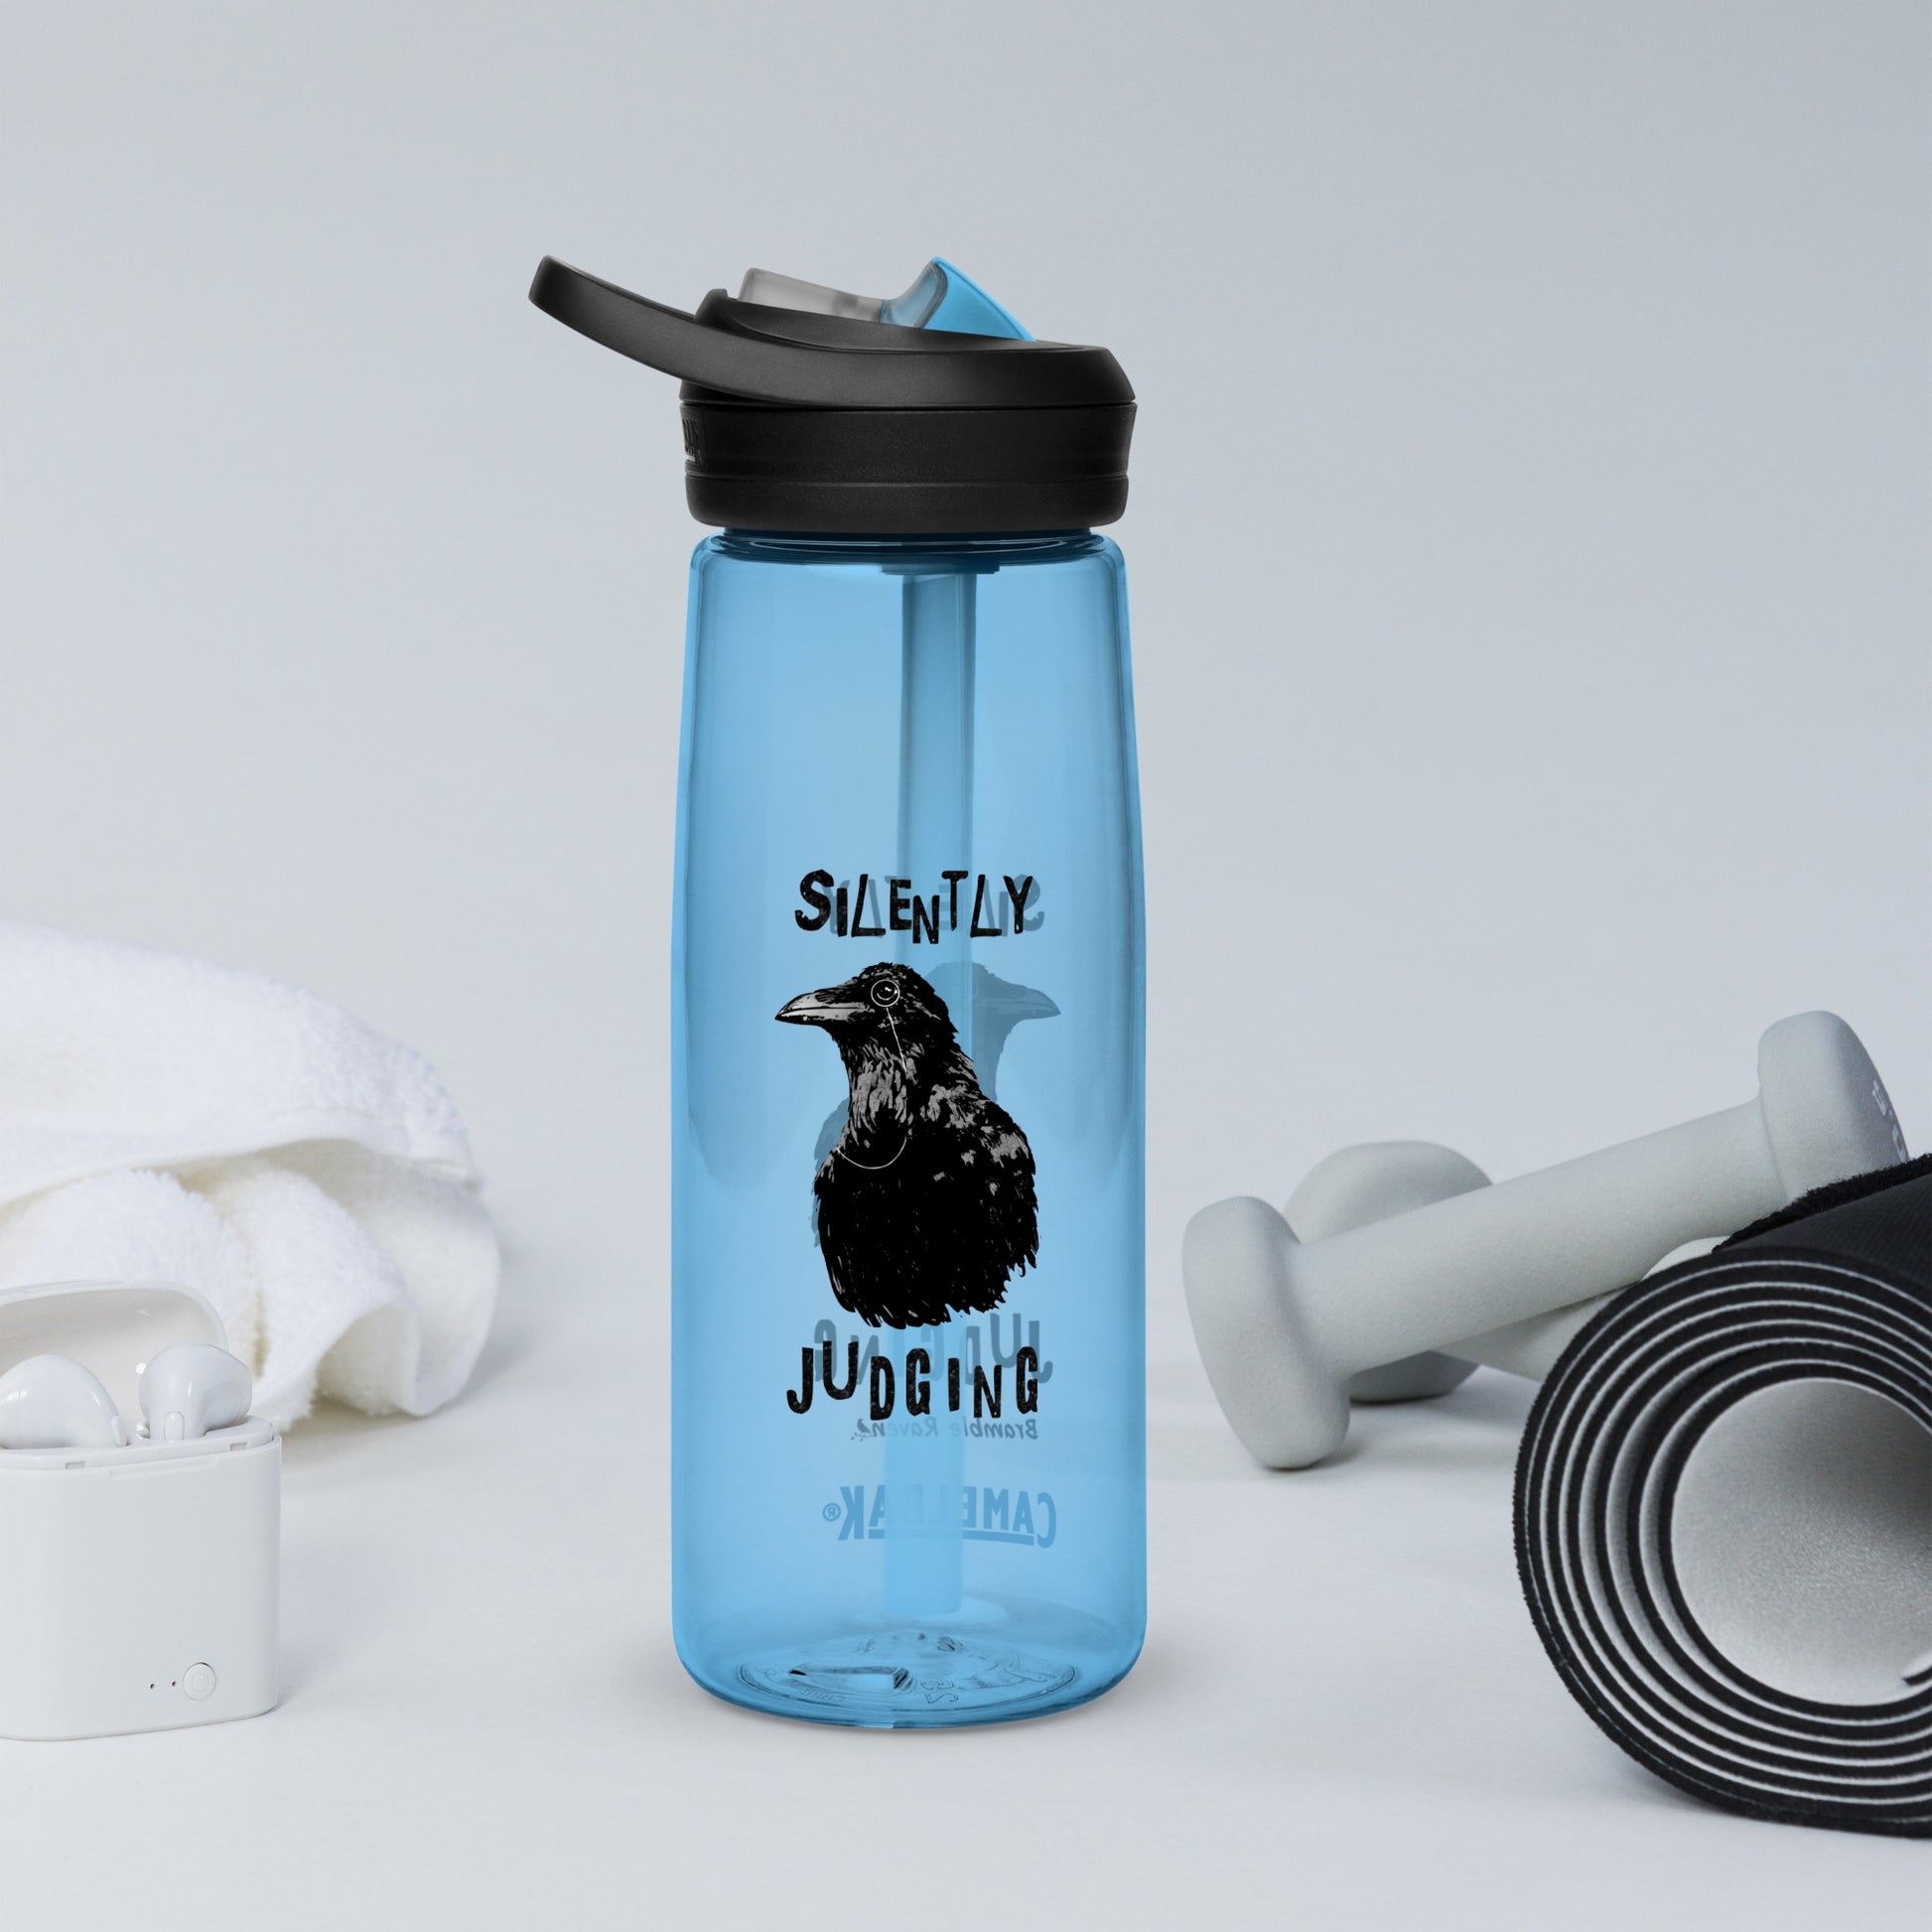 25 ounce sports water bottle with spill-proof lid and bite valve. Light blue stain and odor-resistant BPA-free plastic. Features double-sided design of Silently Judging Crow with his monocle. Shown by yoga mat, weights, and towel.